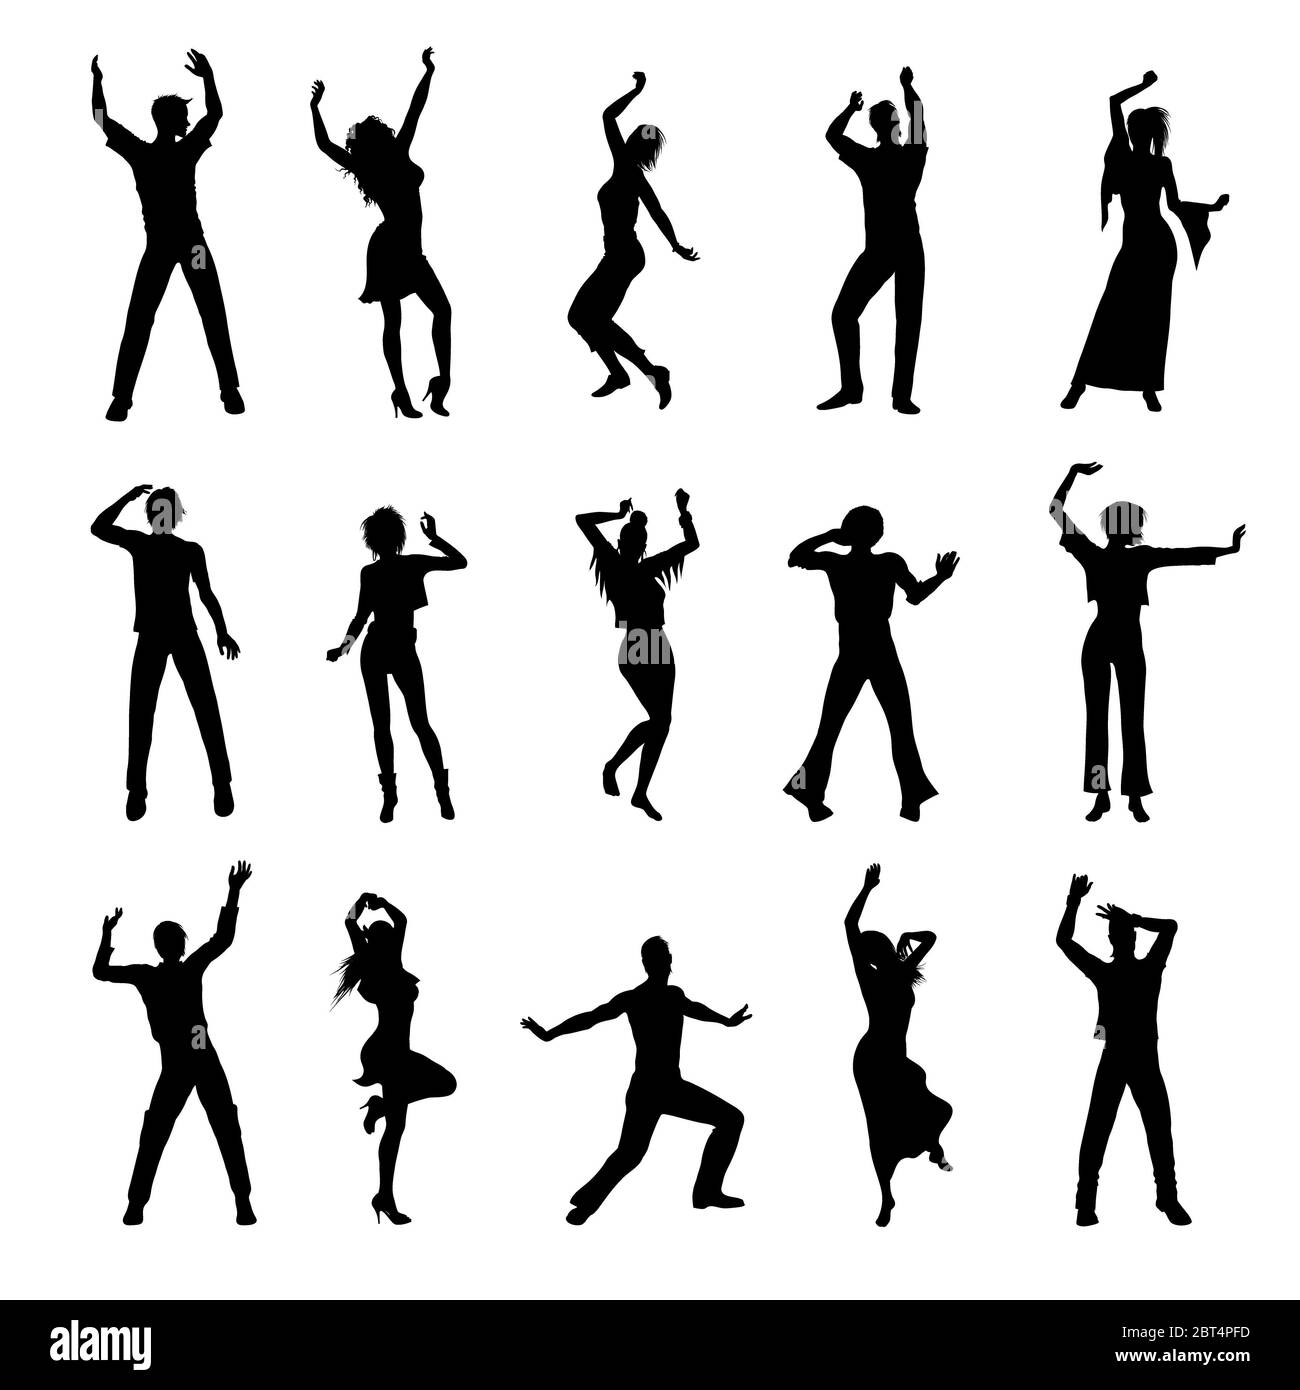 dancing people silhouettes isolated on white background Stock Photo